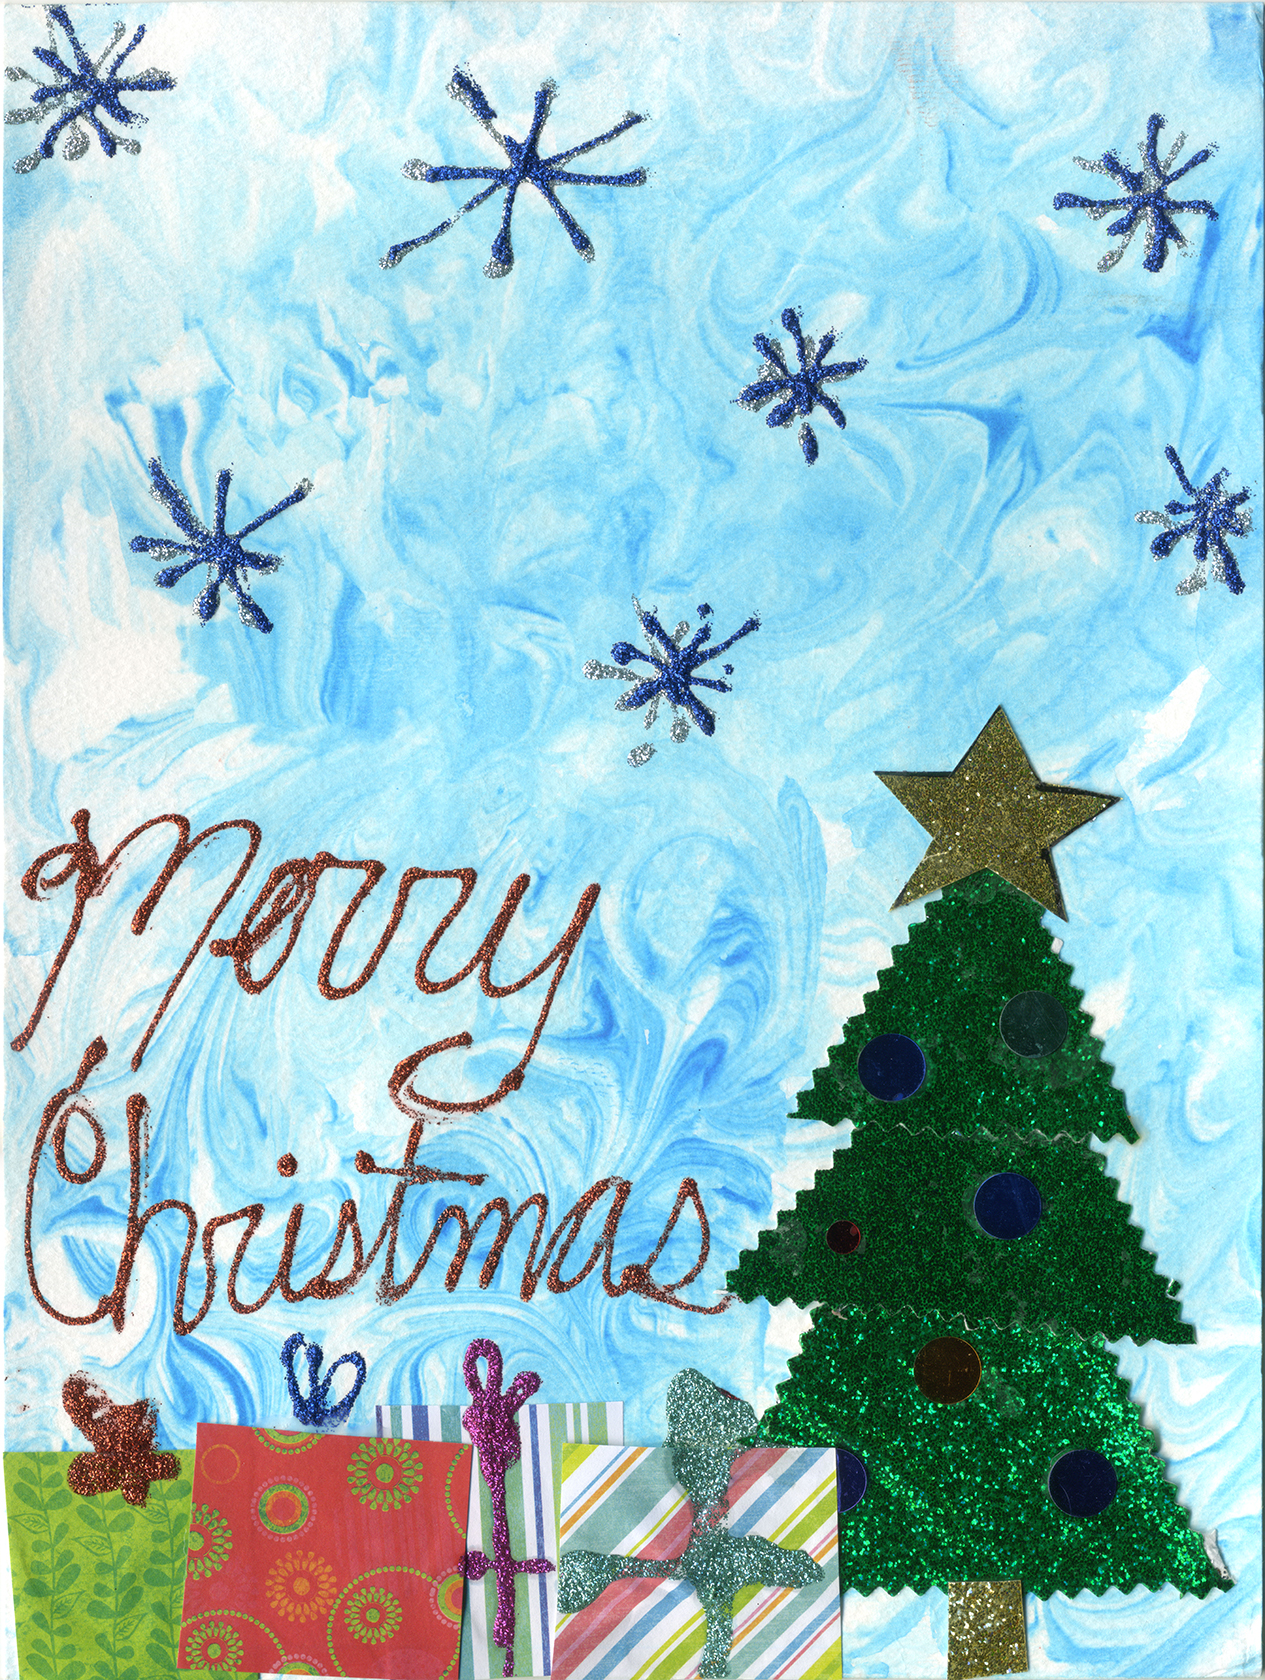 Artwork created by Arlene Heins of New Perspective Senior Living, Faribault, Minn. will be used in Christmas cards for the company's 21 residences throughout the Midwest.